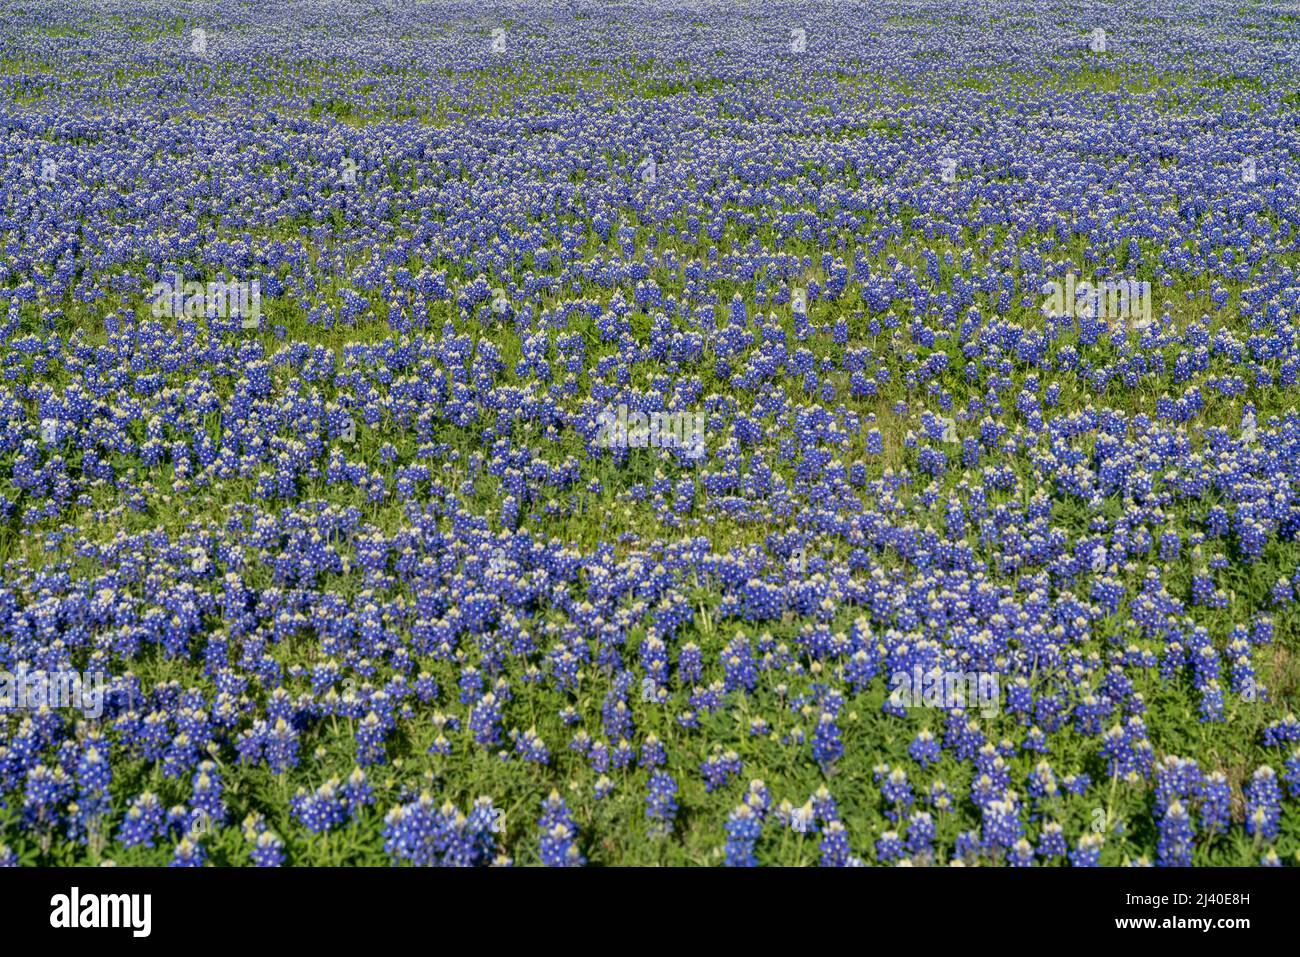 A field of Texas bluebonnets in the spring near Ennis, TX. Stock Photo